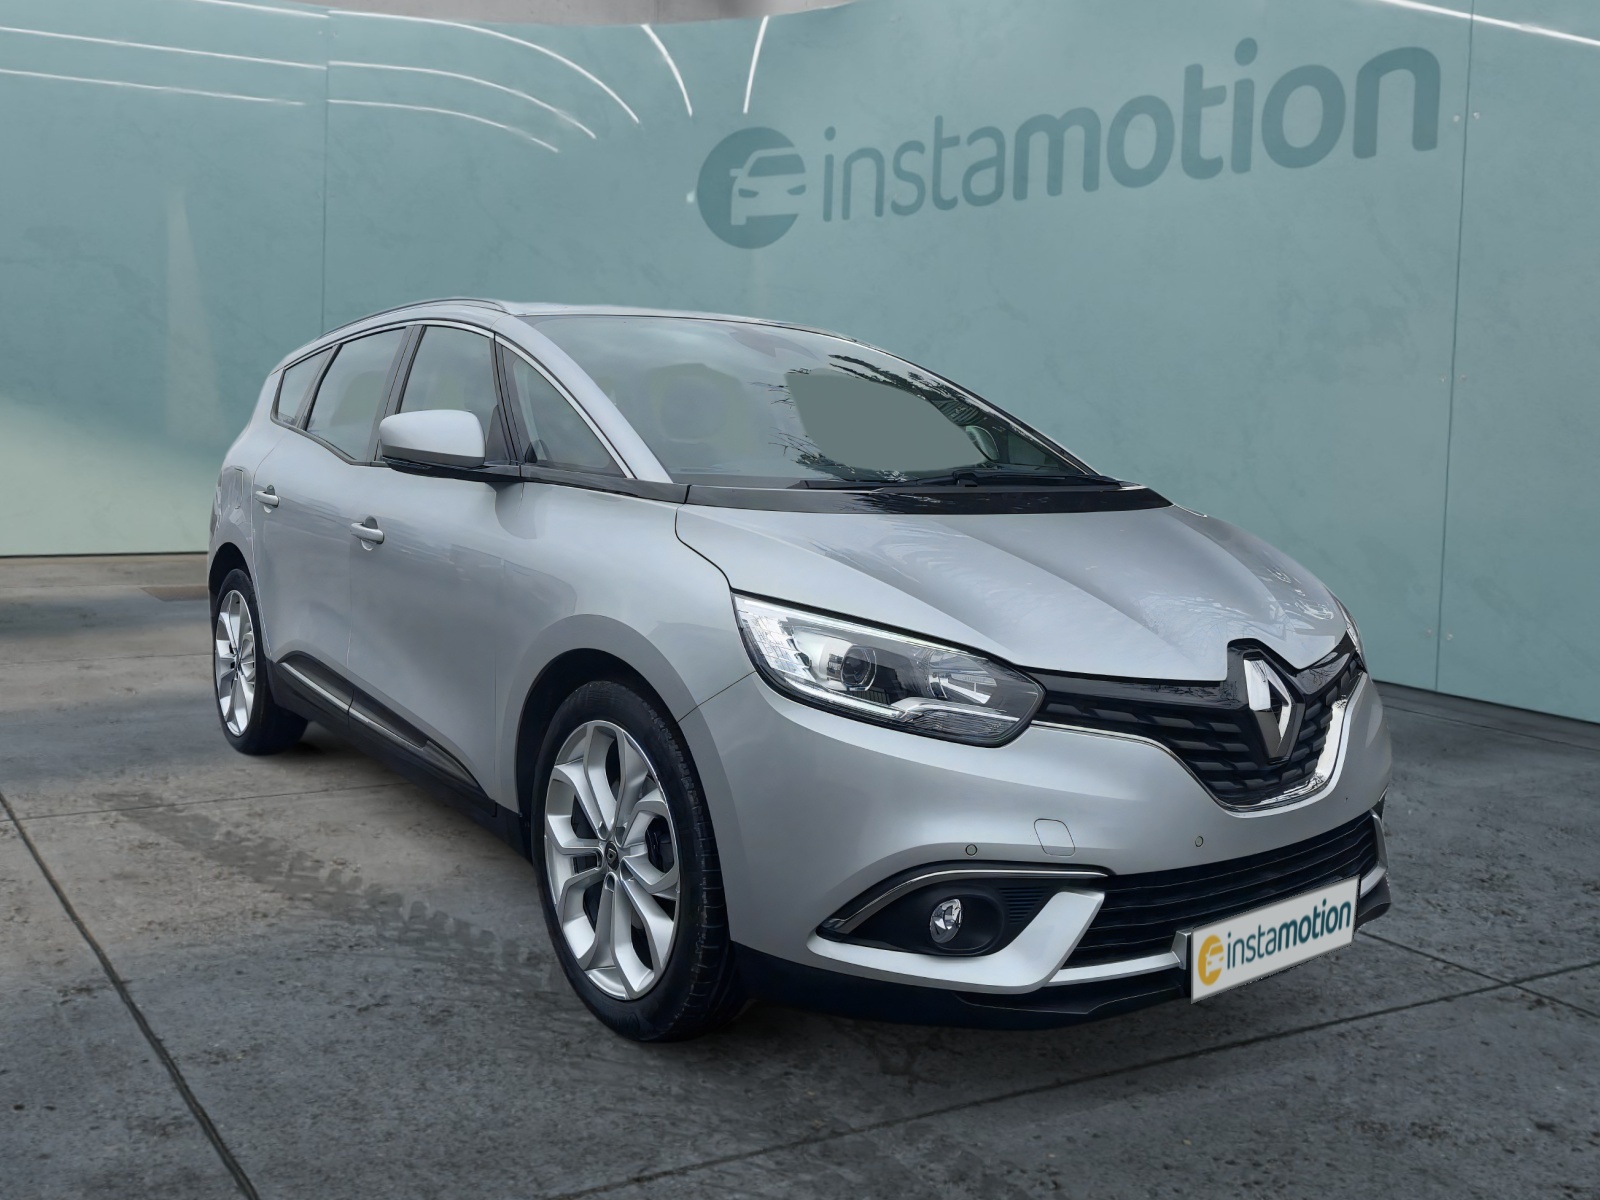 Renault Scenic 1.6 IV dCi 130 Energy Business Edition